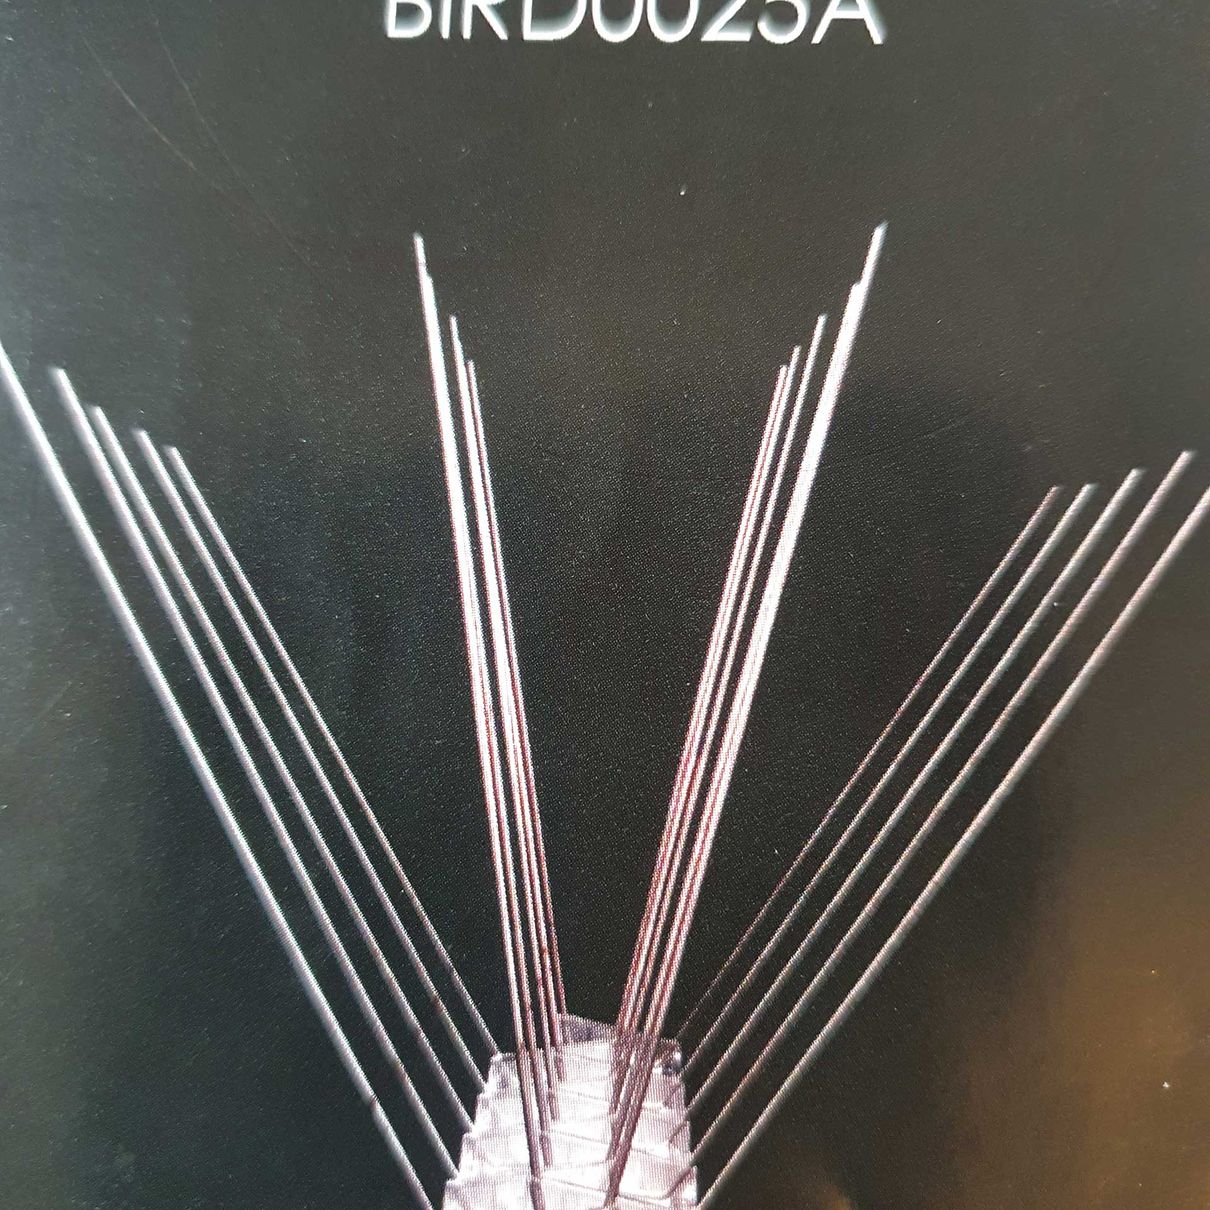 Stainless steel bird spikes with extra spikes